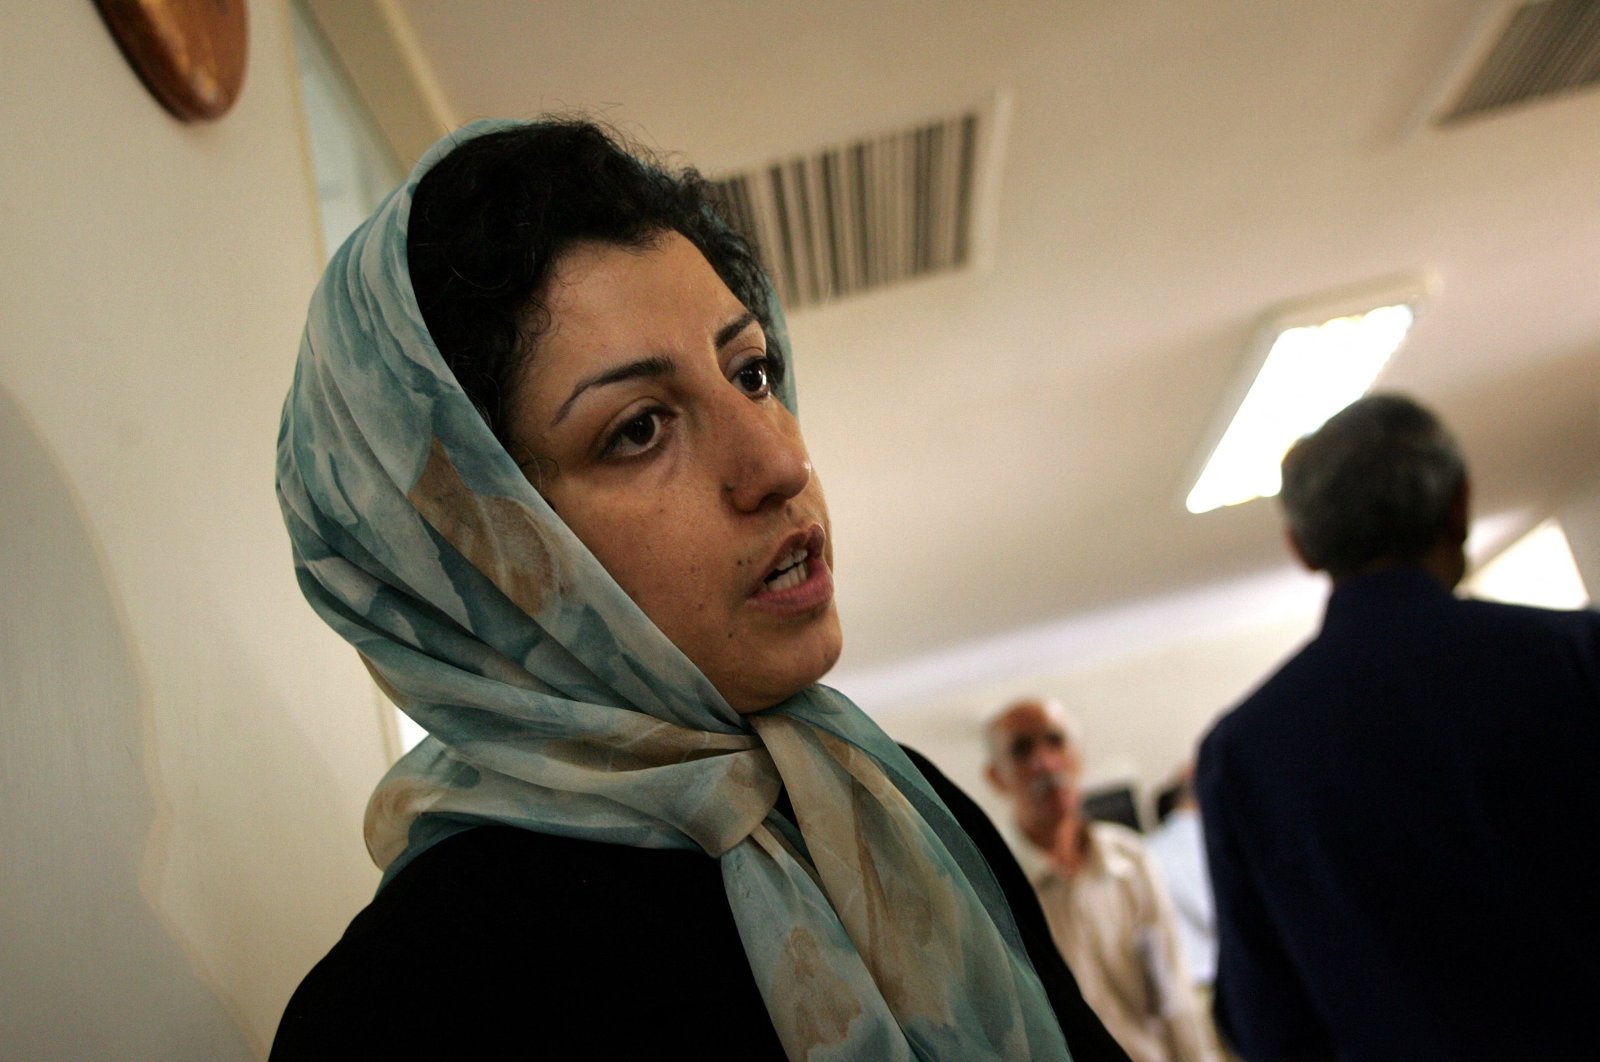 Iranian human rights activist Narges Mohammadi is seen at the Defenders of Human Rights Center in Tehran, Iran, June 25, 2007. (AFP Photo)